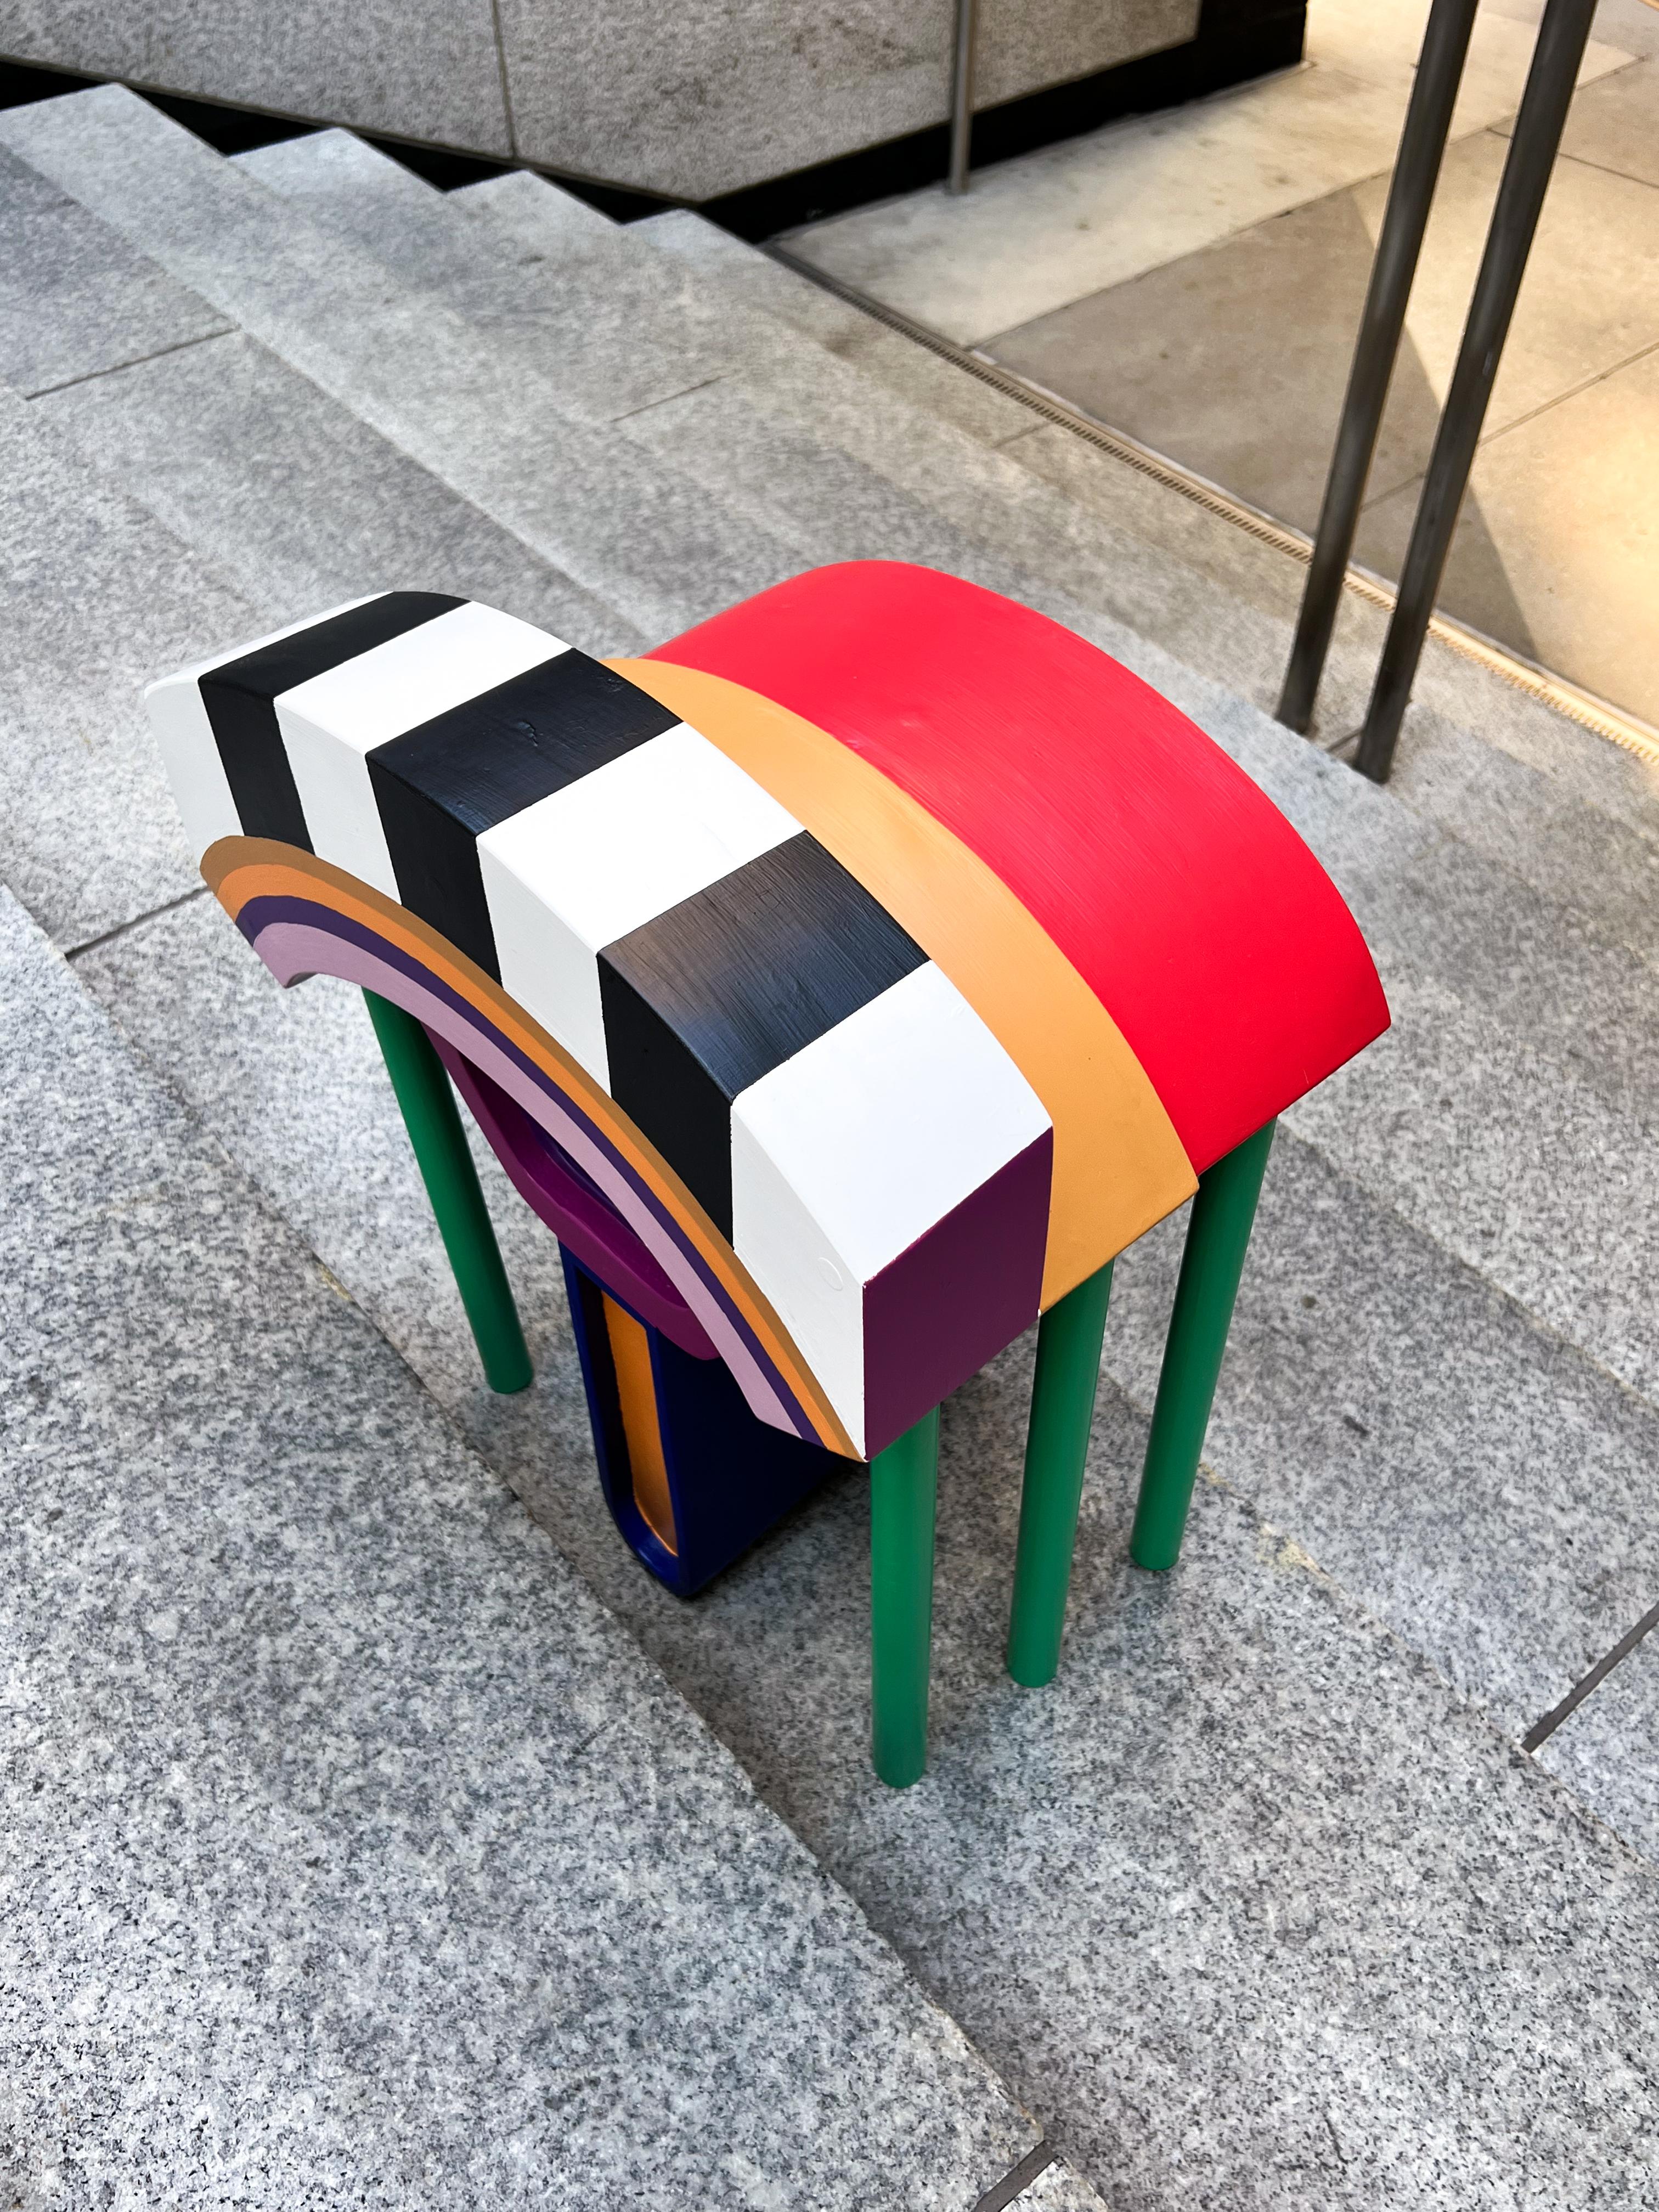 The stool, which is part of a larger collection called Playground, intensifies your emotions, using its contrast in forms and colors, and urges you to stop, wander around it, and take a seat, maybe! Henri is part of the Sweet Gathering